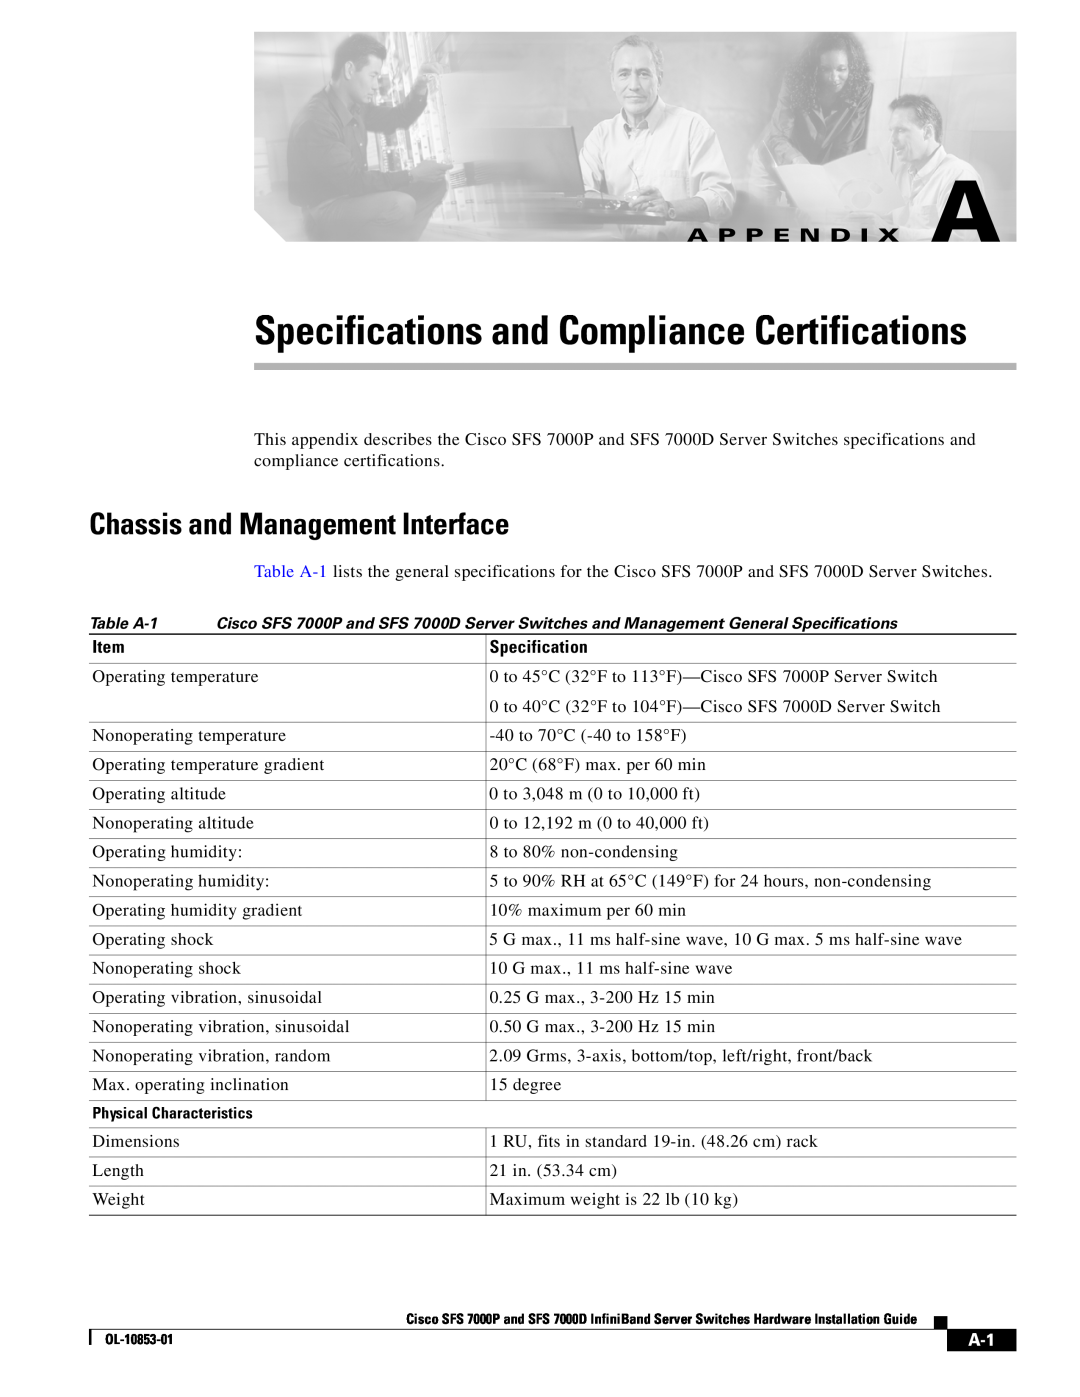 Cisco Systems SFS 7000D Specifications and Compliance Certifications, Chassis and Management Interface, A P P E N D I X A 